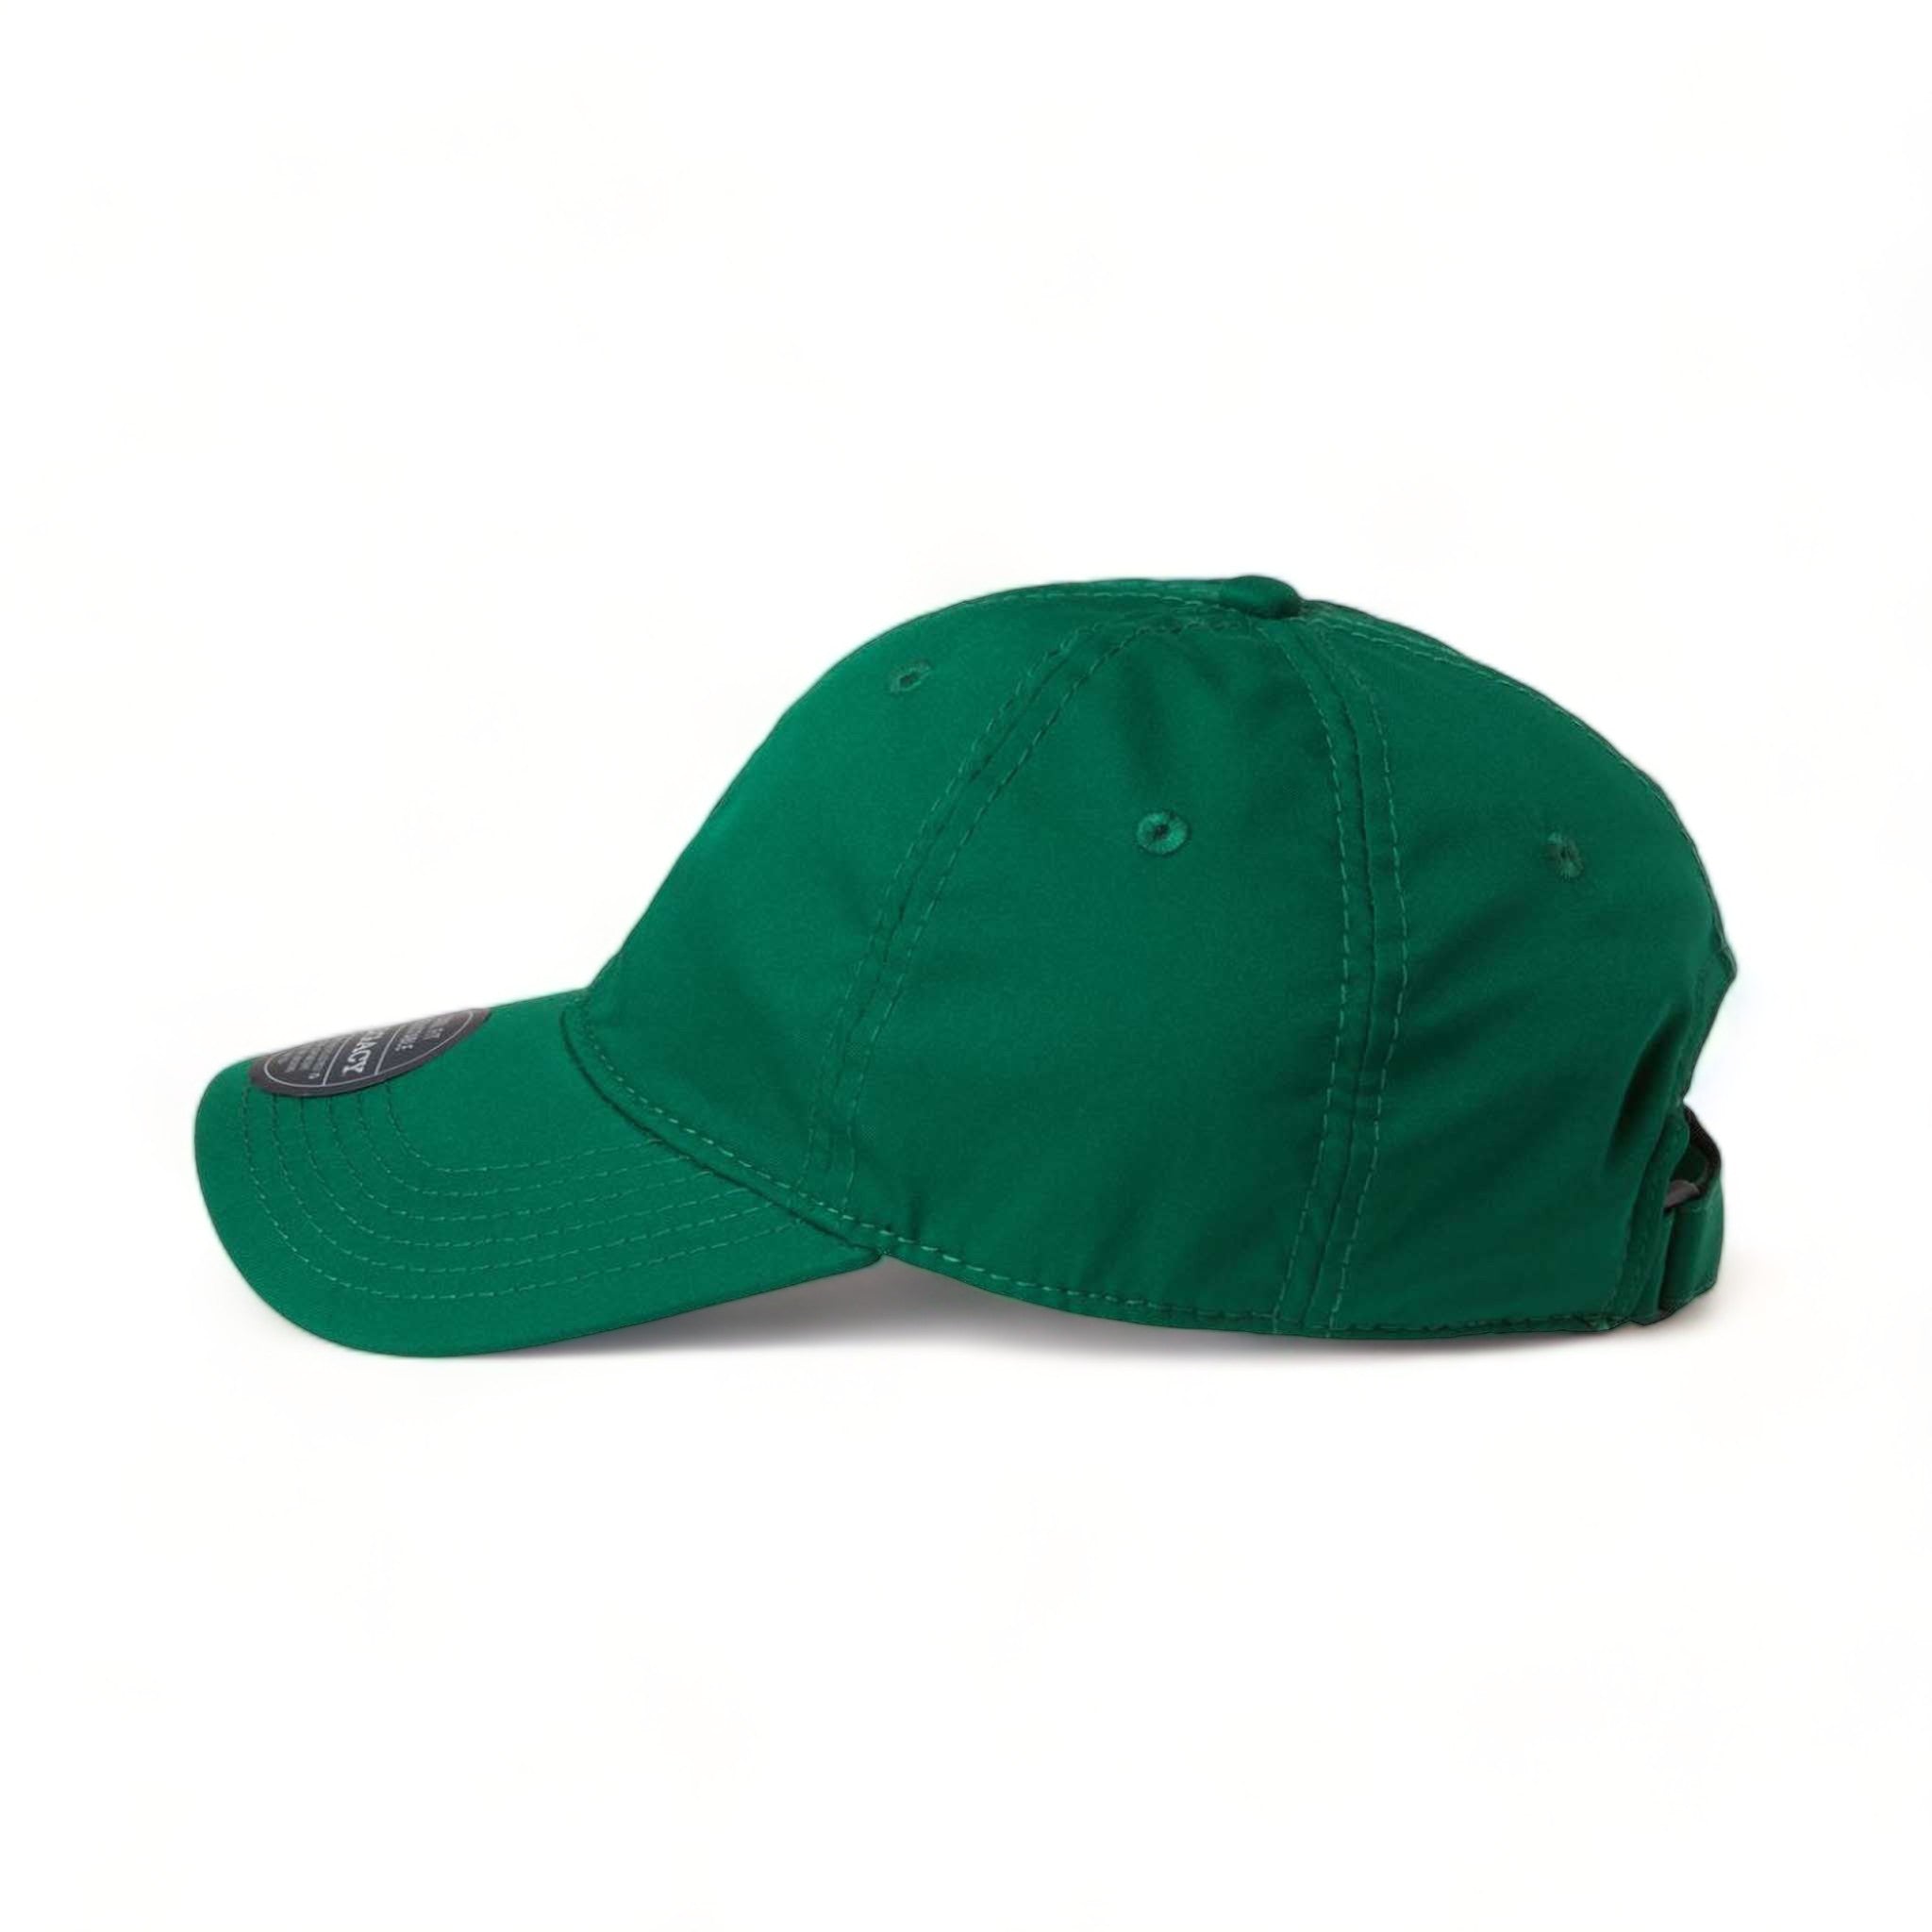 Side view of LEGACY CFA custom hat in forest